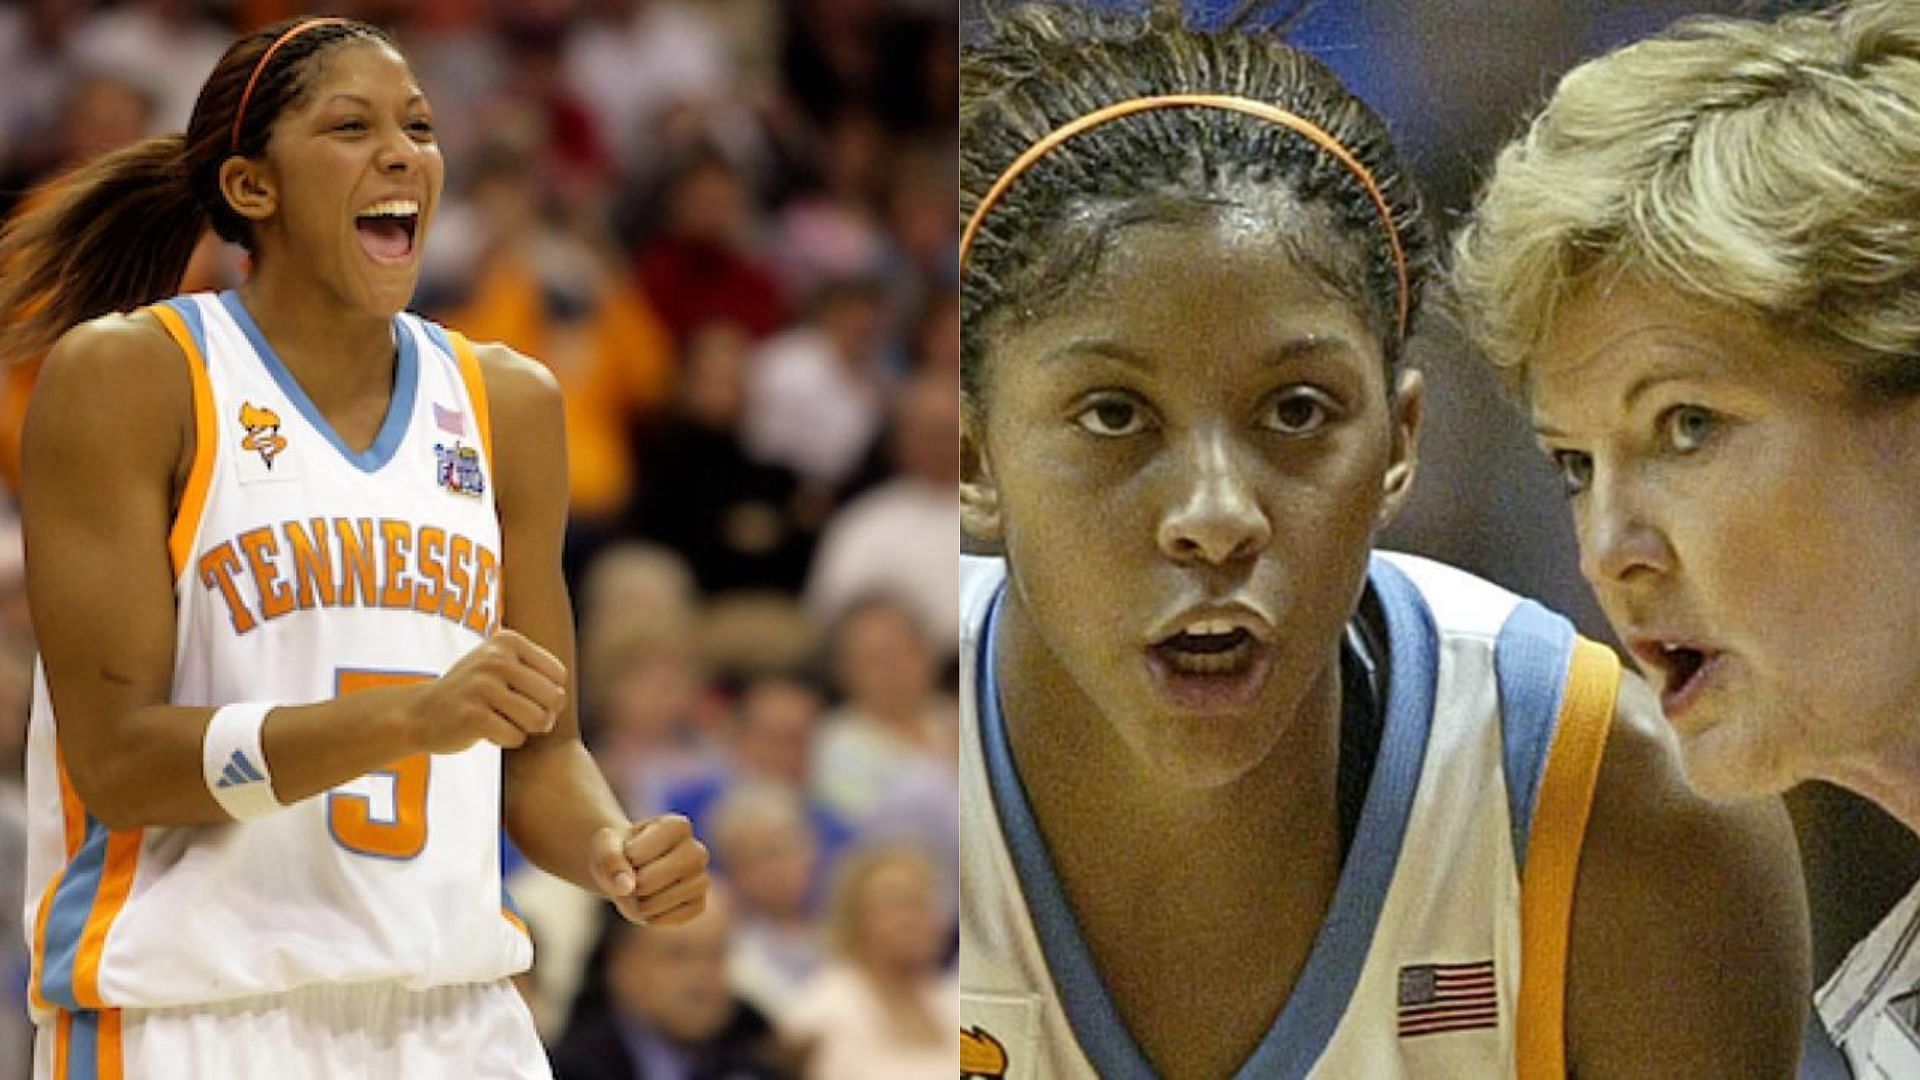 Candace Parker dominated in college basketball